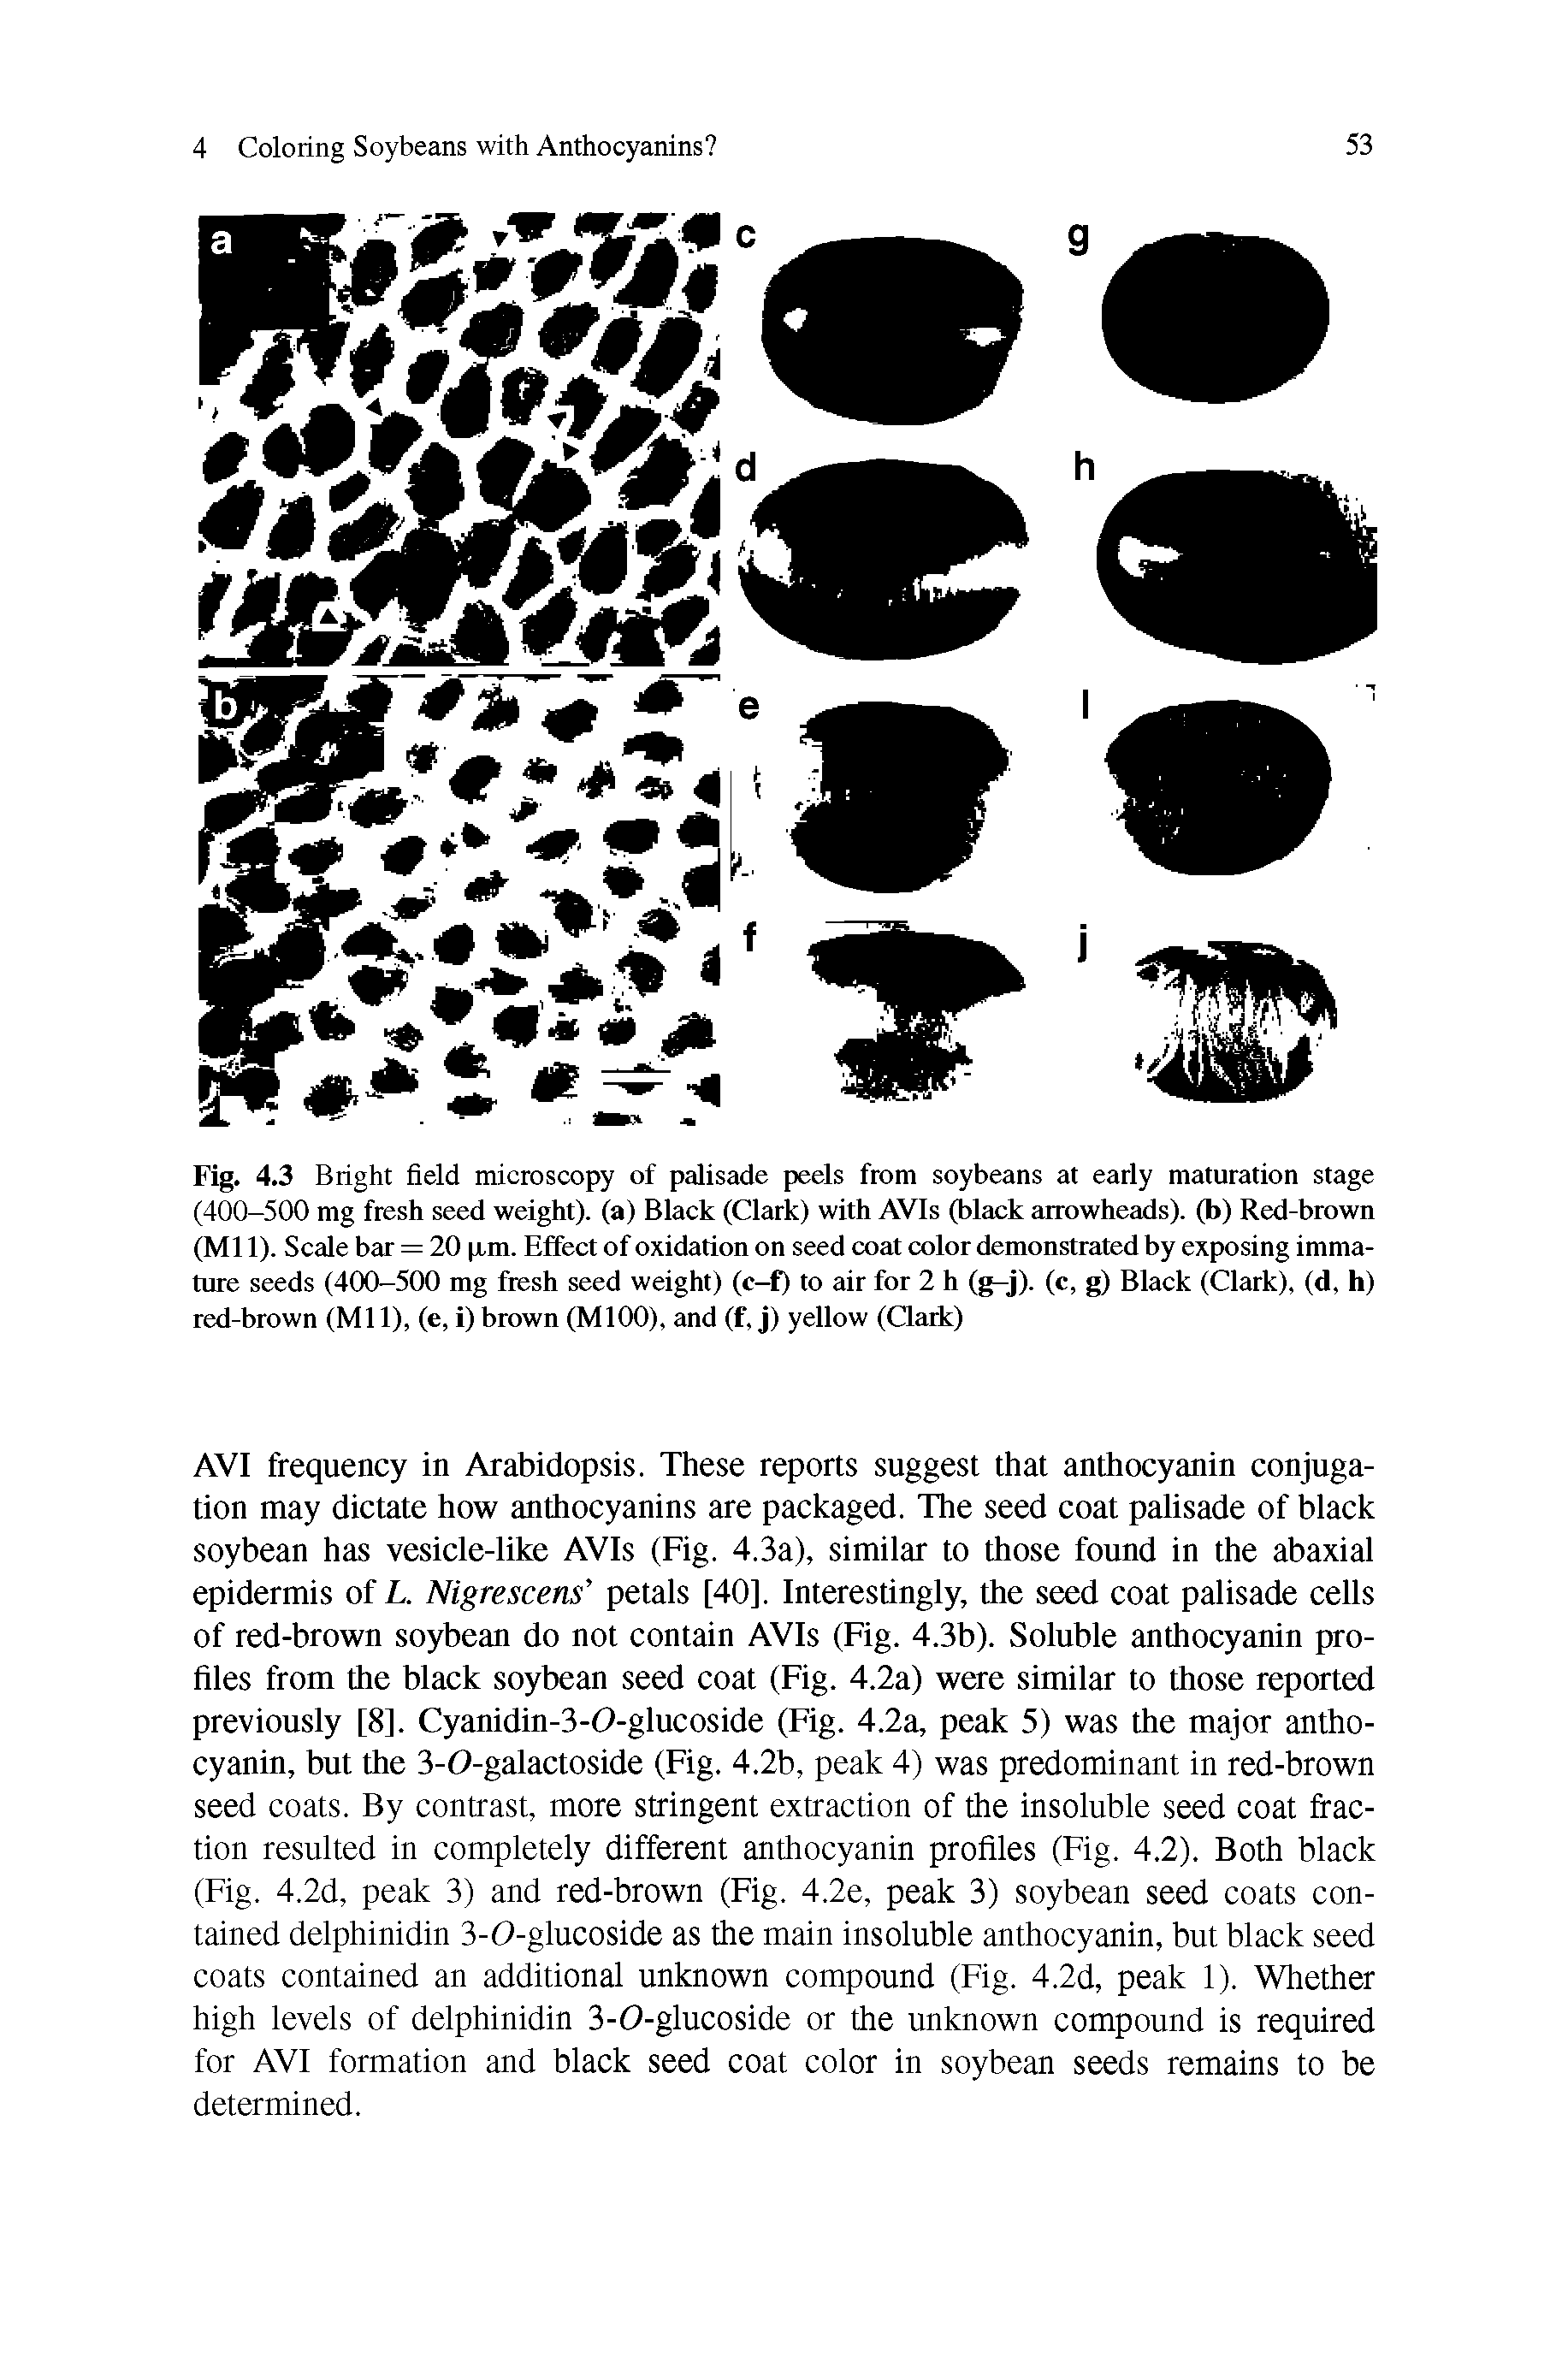 Fig. 4.3 Bright field microscopy of palisade peels from soybeans at early maturation stage (400-500 mg fresh seed weight), (a) Black (Clark) with AVIs (black arrowheads), (b) Red-brown (Ml 1). Scale bar = 20 (jim. Effect of oxidation on seed coat color demonstrated by exposing immature seeds (400-500 mg fresh seed weight) (c-f) to air for 2 h (g-j). (c, g) Black (Clark), (d, h) red-brown (Mil), (e, i)brown (MlOO), and (f, j) yellow (Qark)...